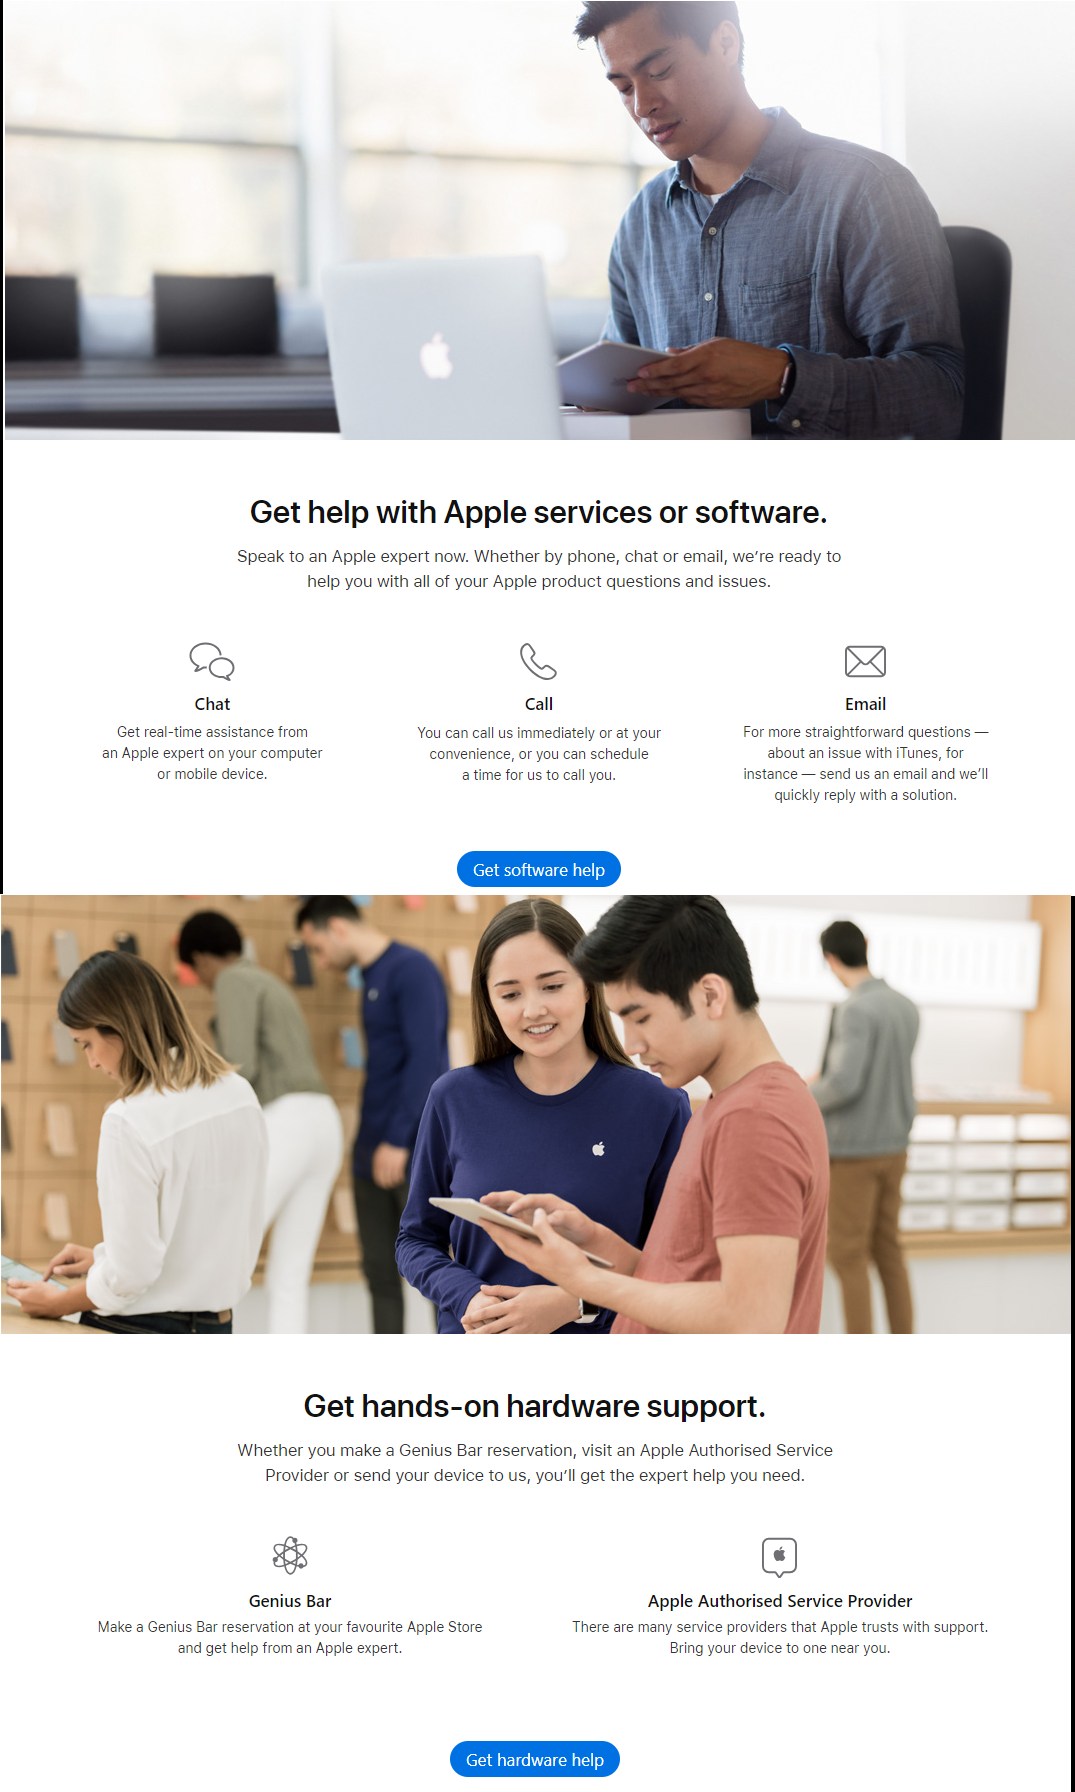 Apple customer experience example of getting help with Apple services or software or getting hands-on hardware support